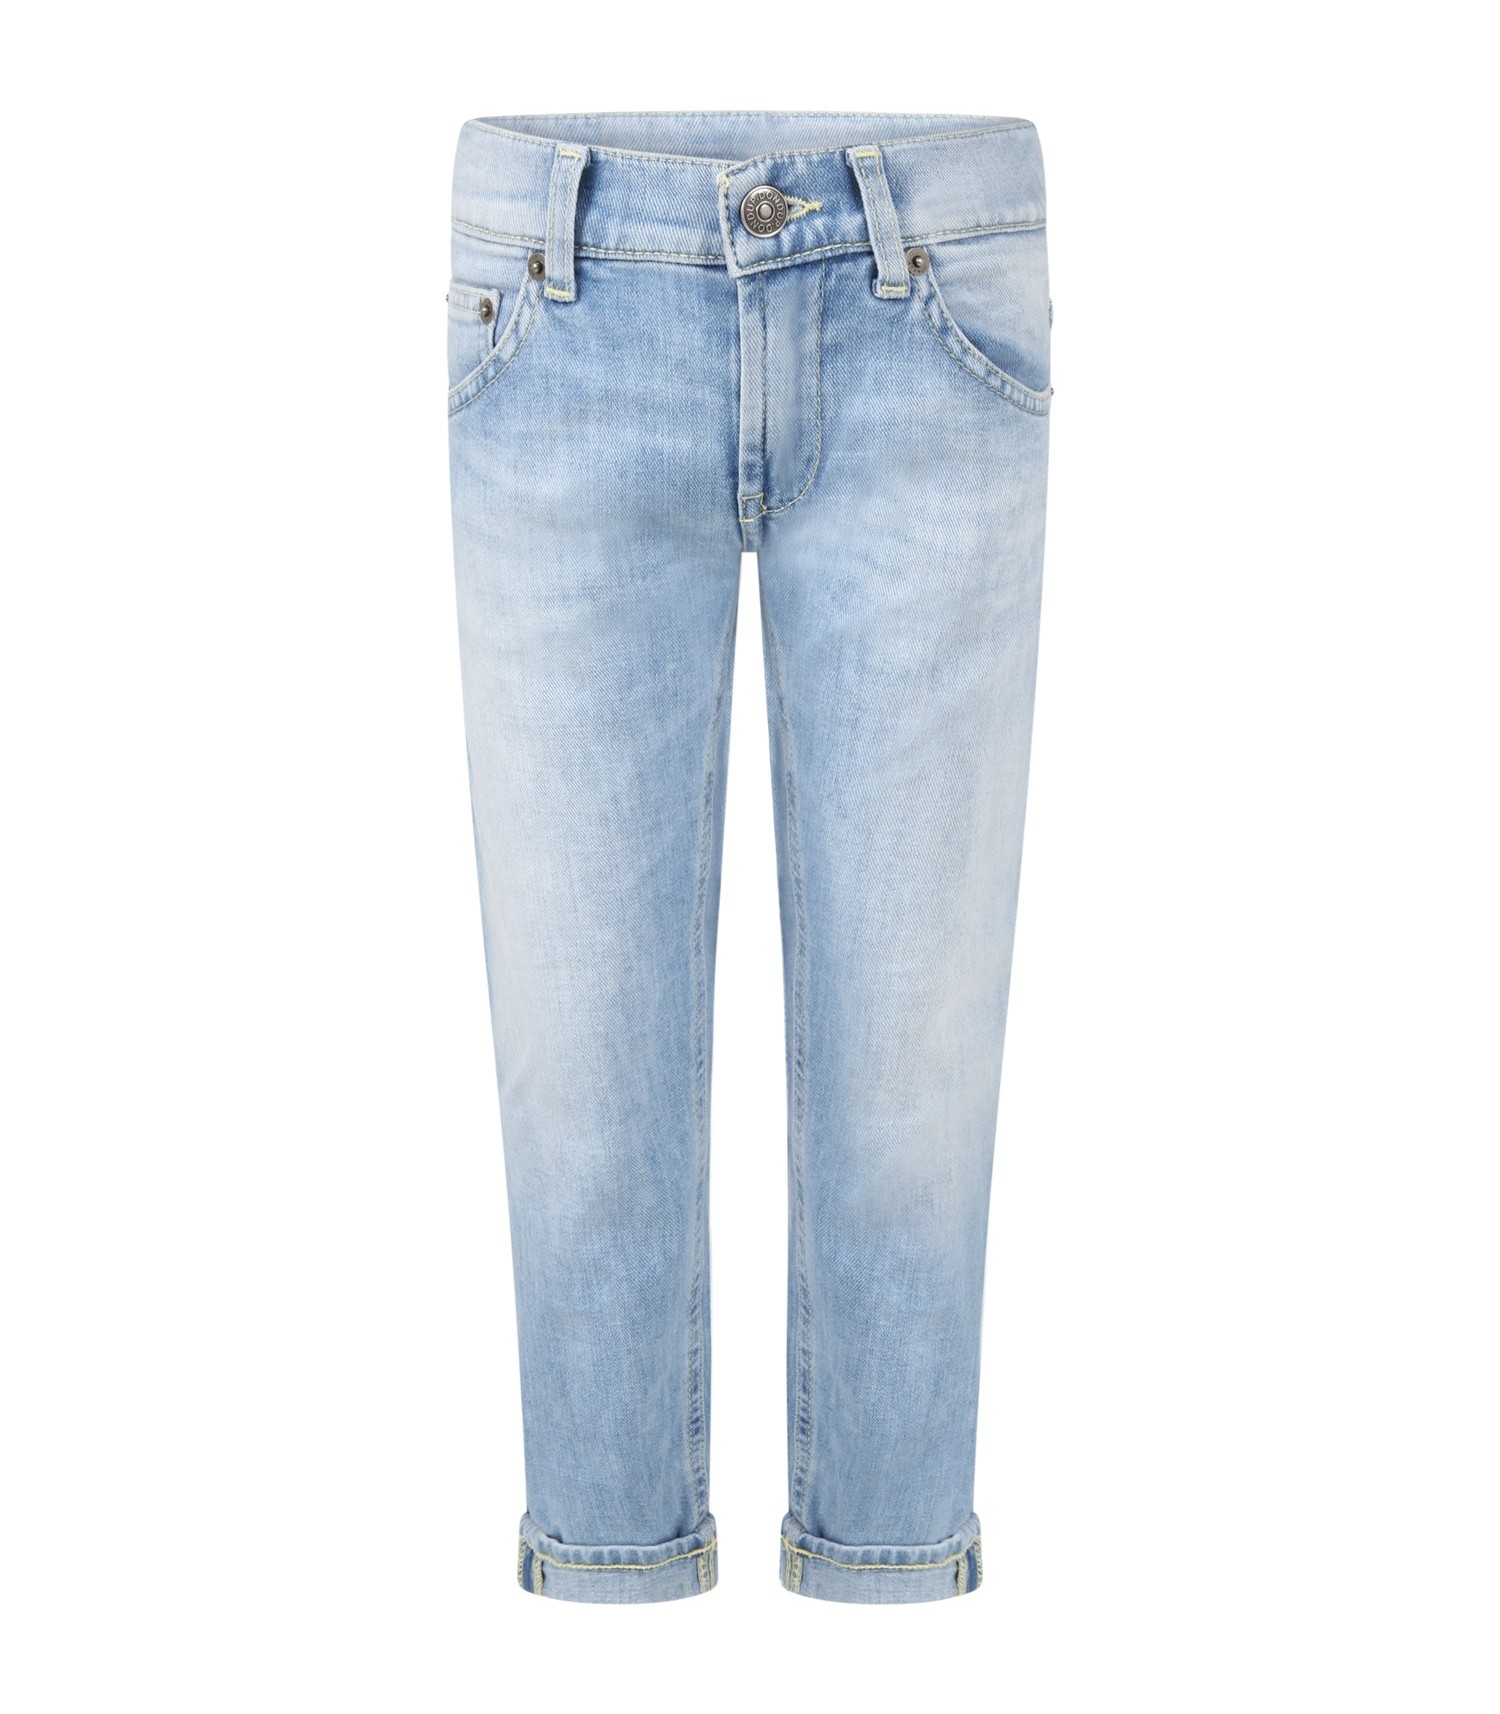 Dondup Kids Light-blue jeans for boy with patch logo